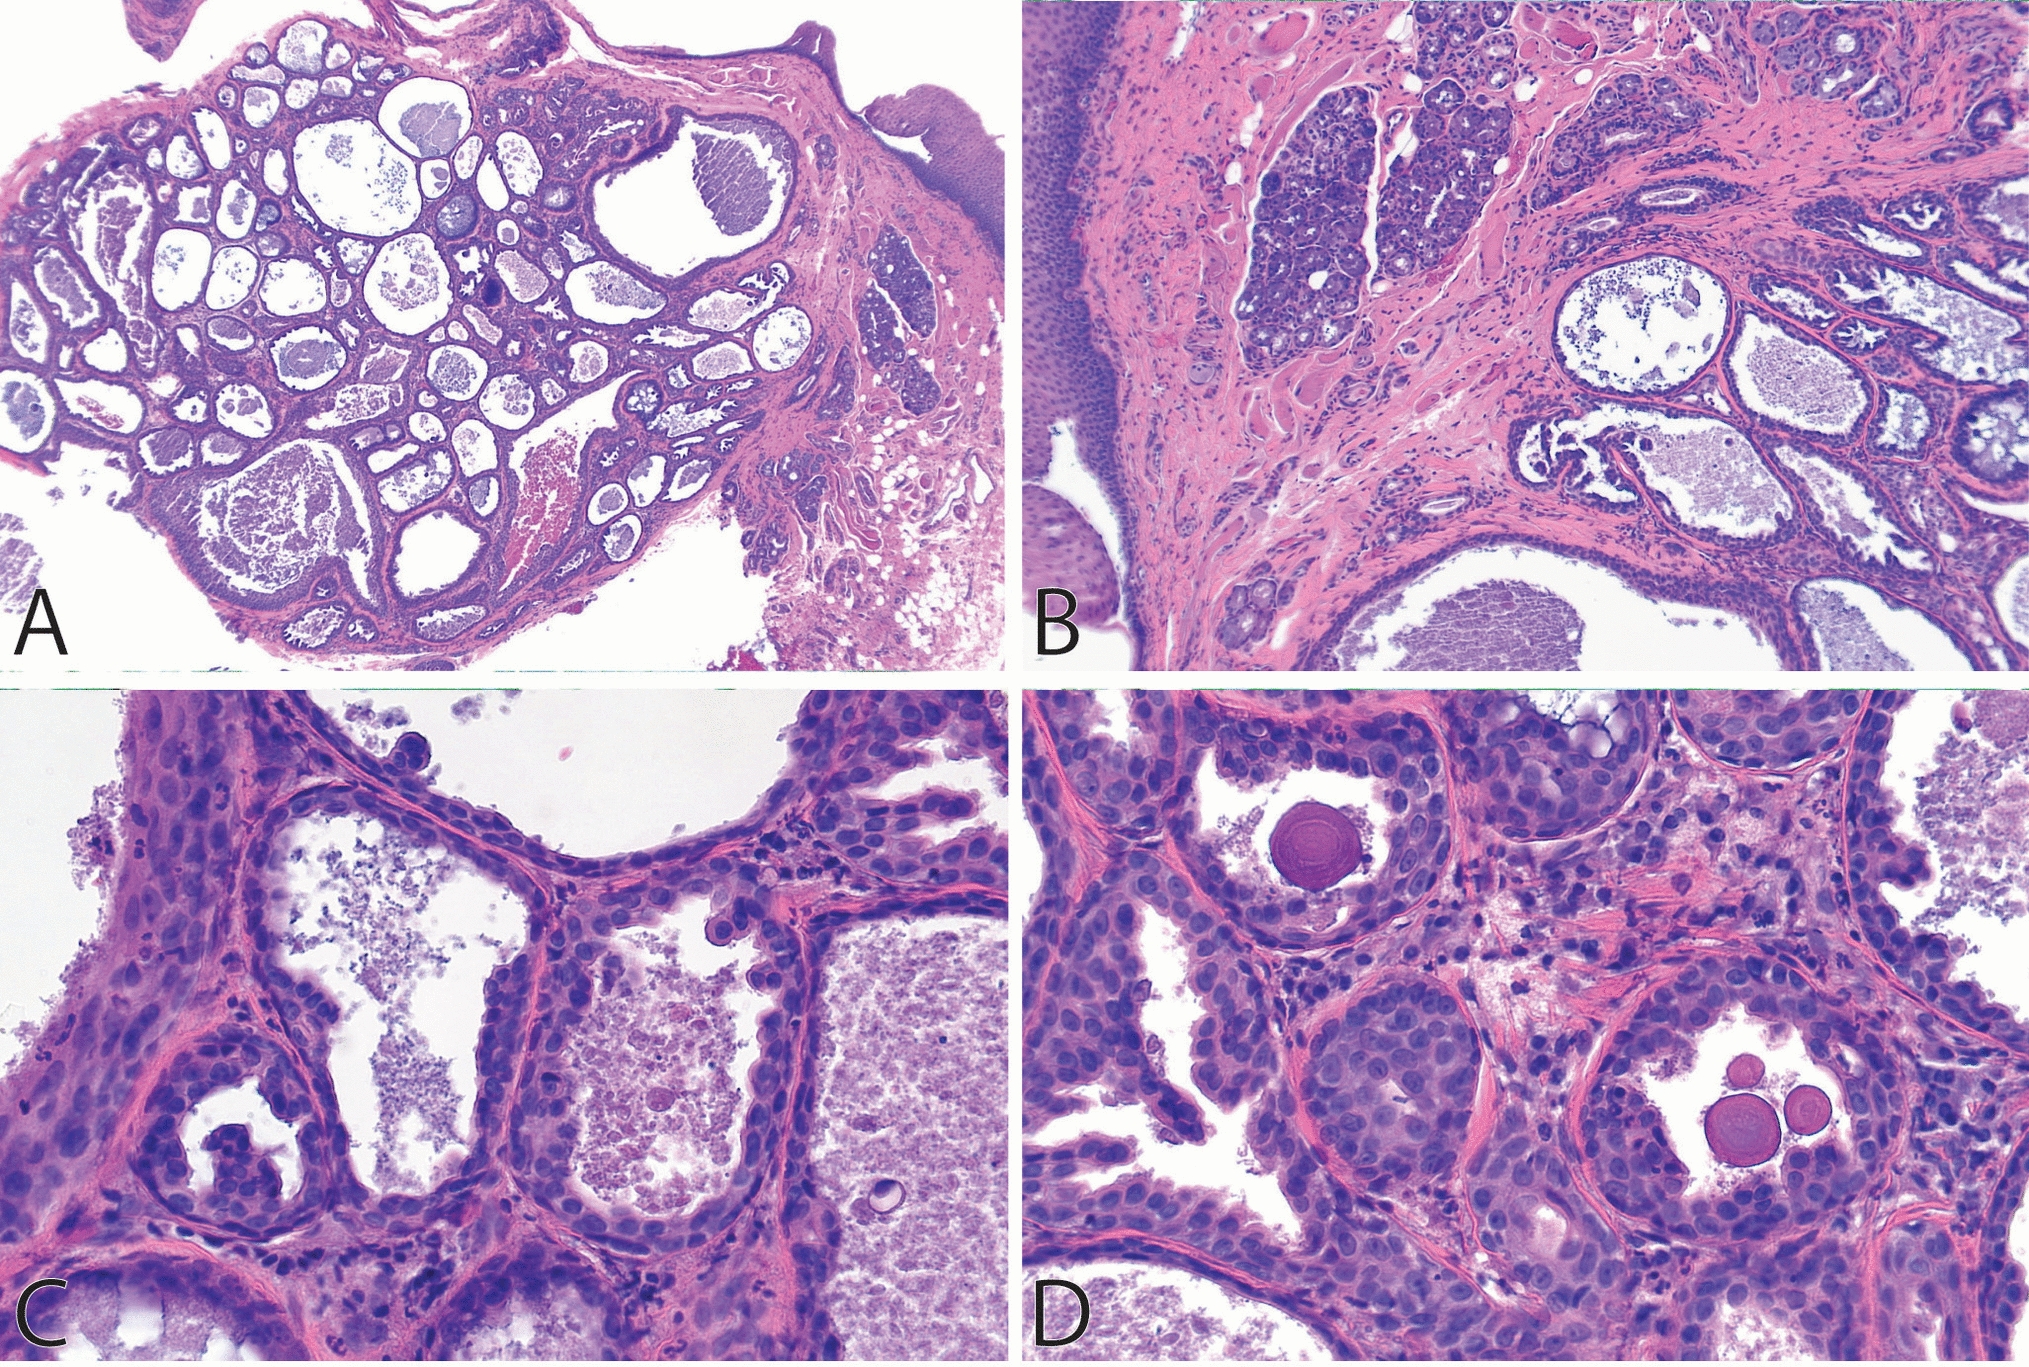 Dysgenetic Polycystic Disease of the Salivary Glands: A Case Report of This Rare Entity Occurring for the First Time in the Minor Salivary Glands of the Tongue, and a Review of the Literature